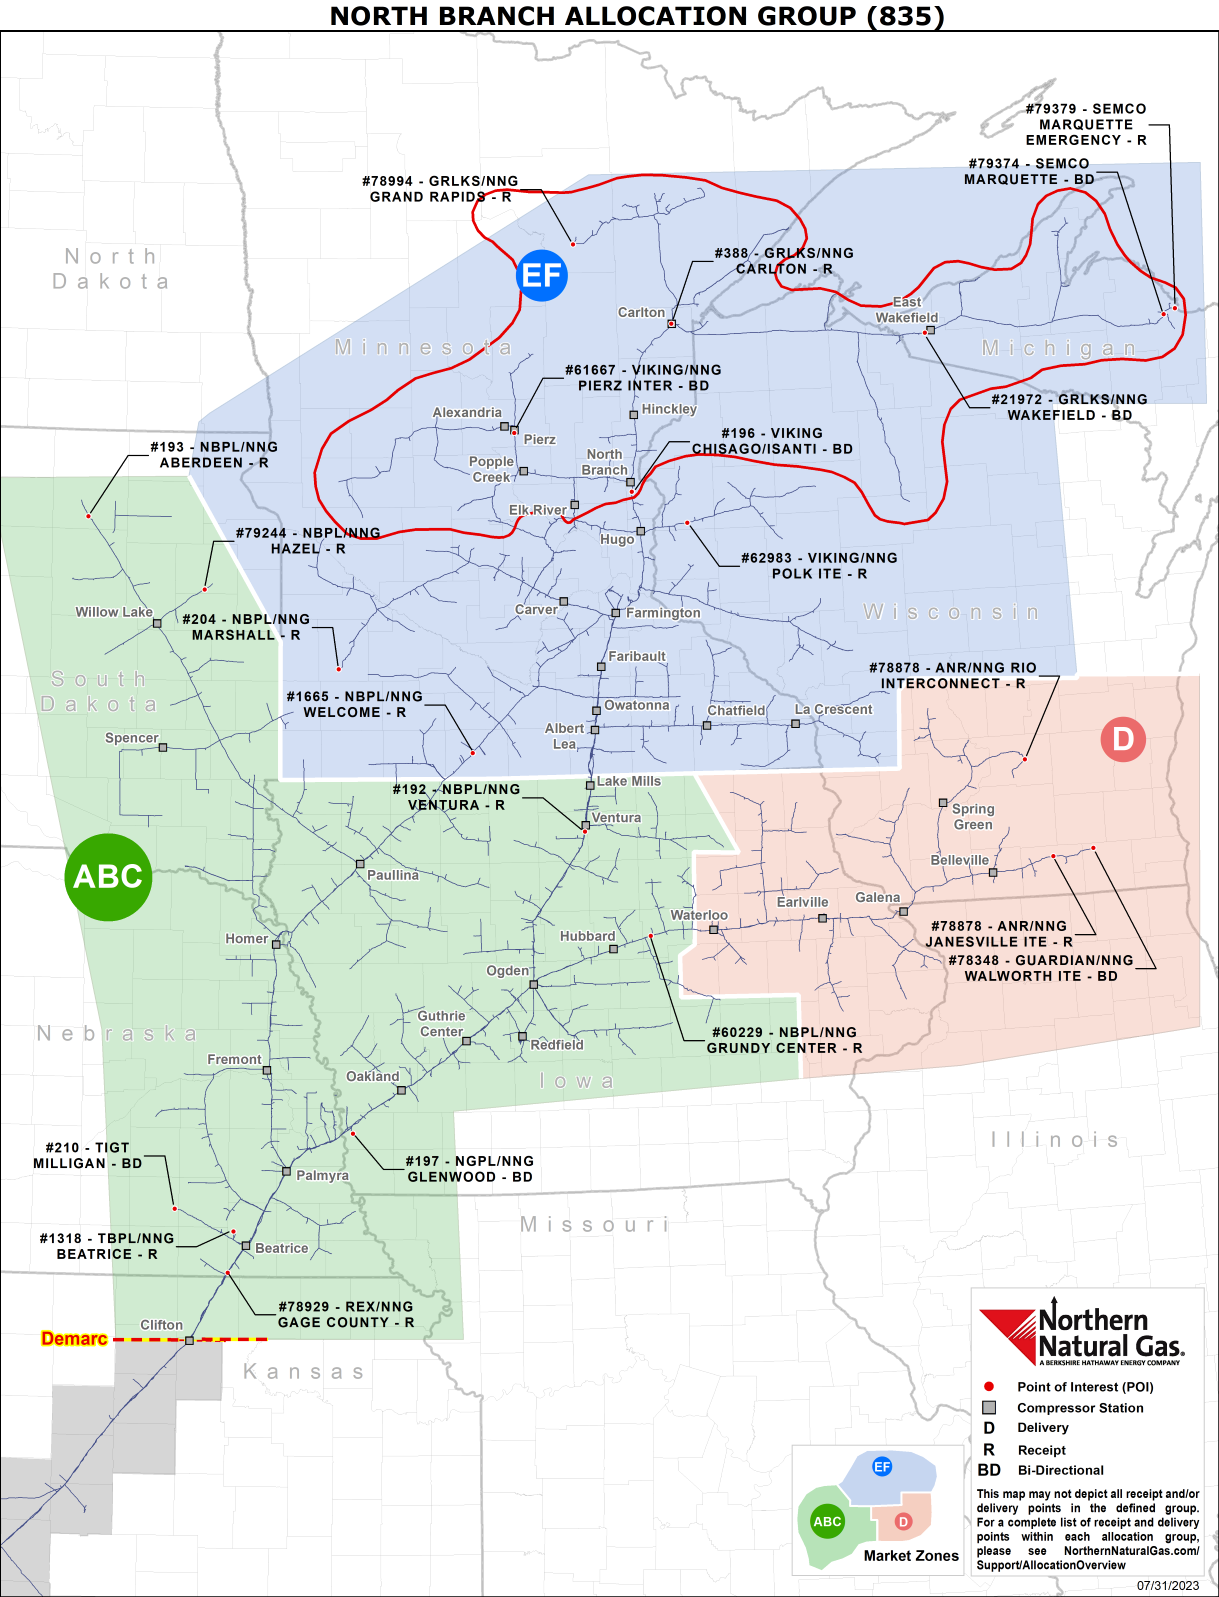 (835) North Branch Allocation Group Map